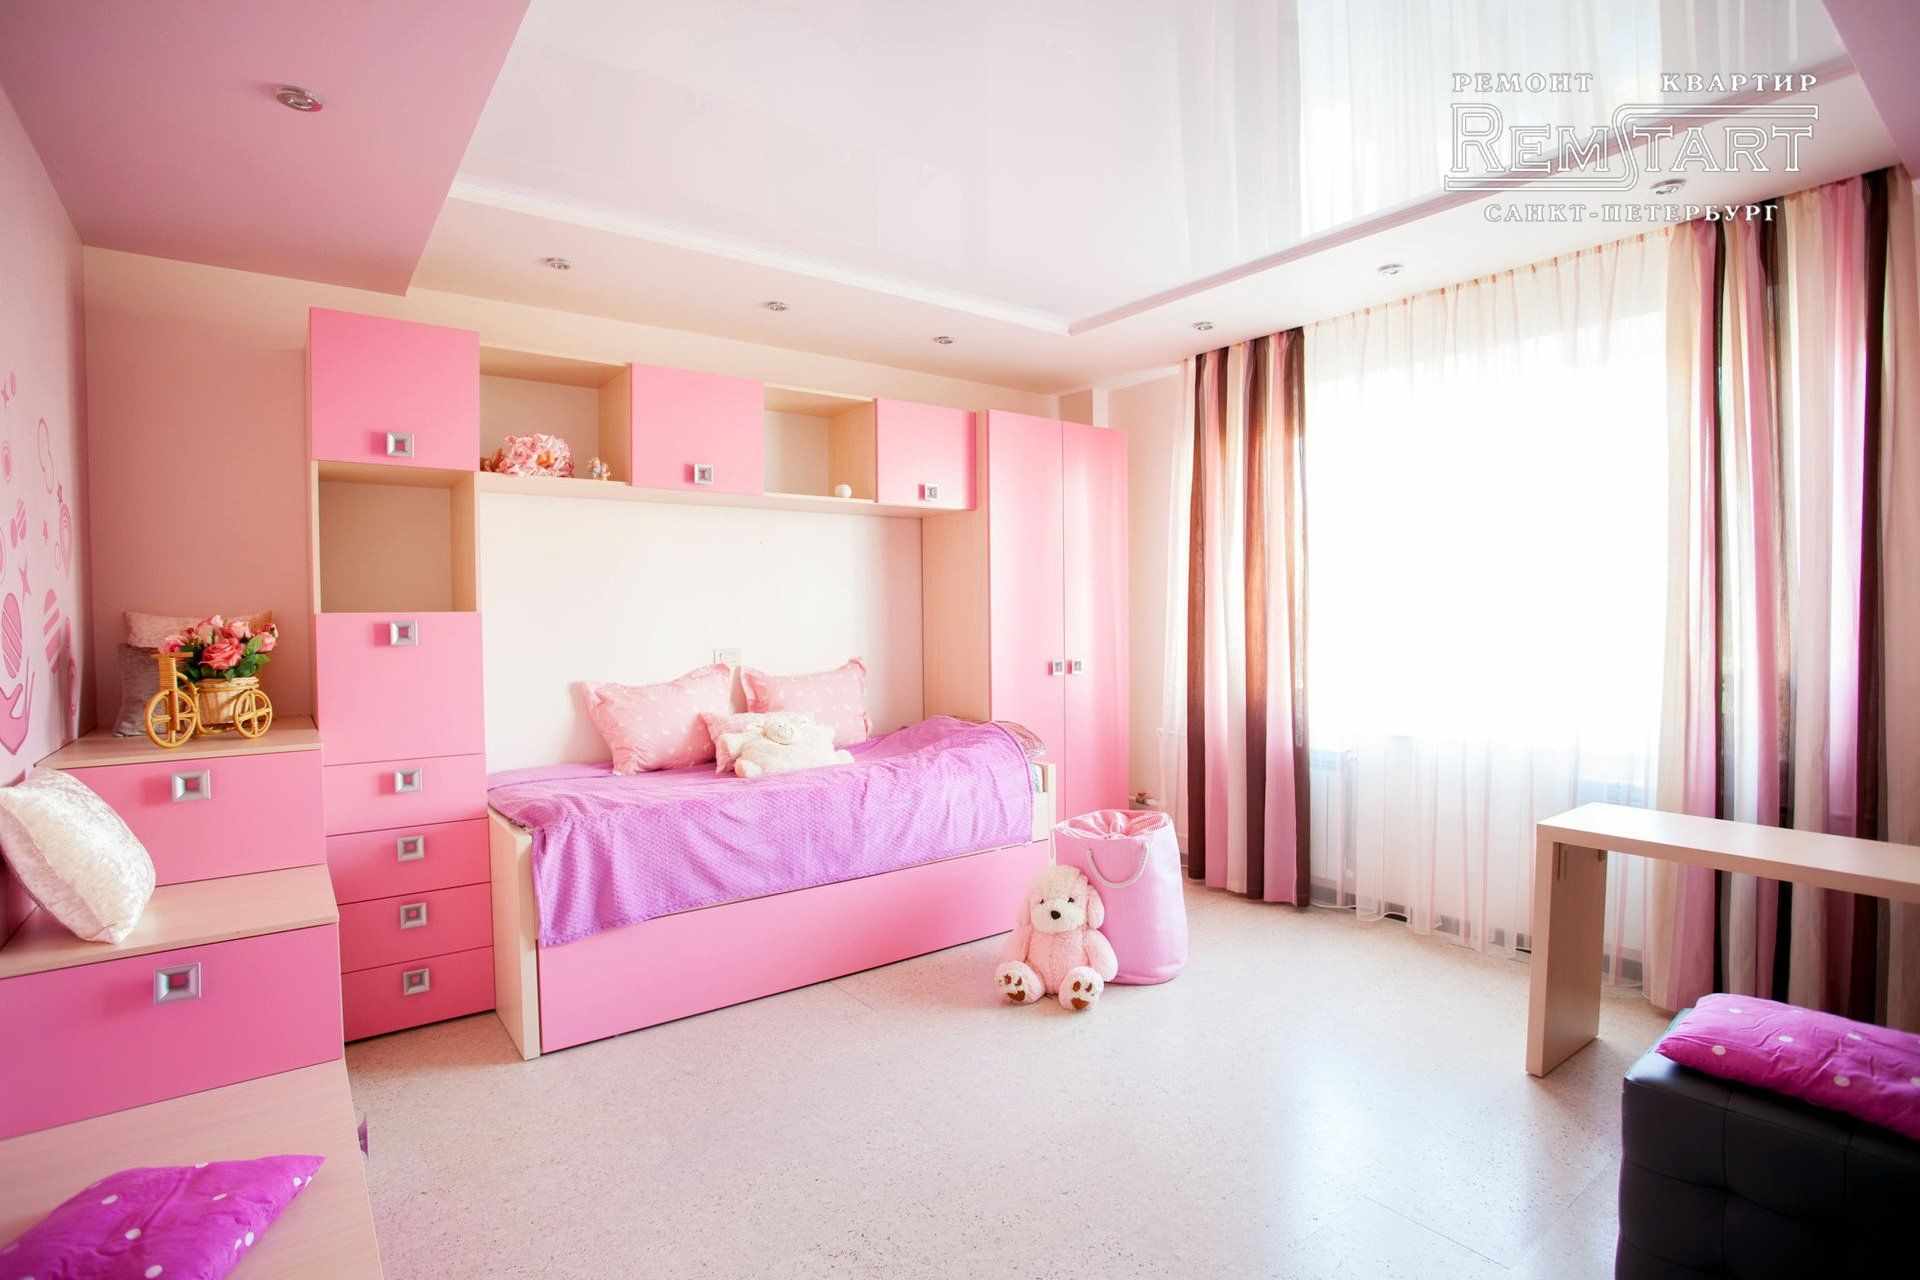 the idea of ​​a beautiful bedroom interior for a girl